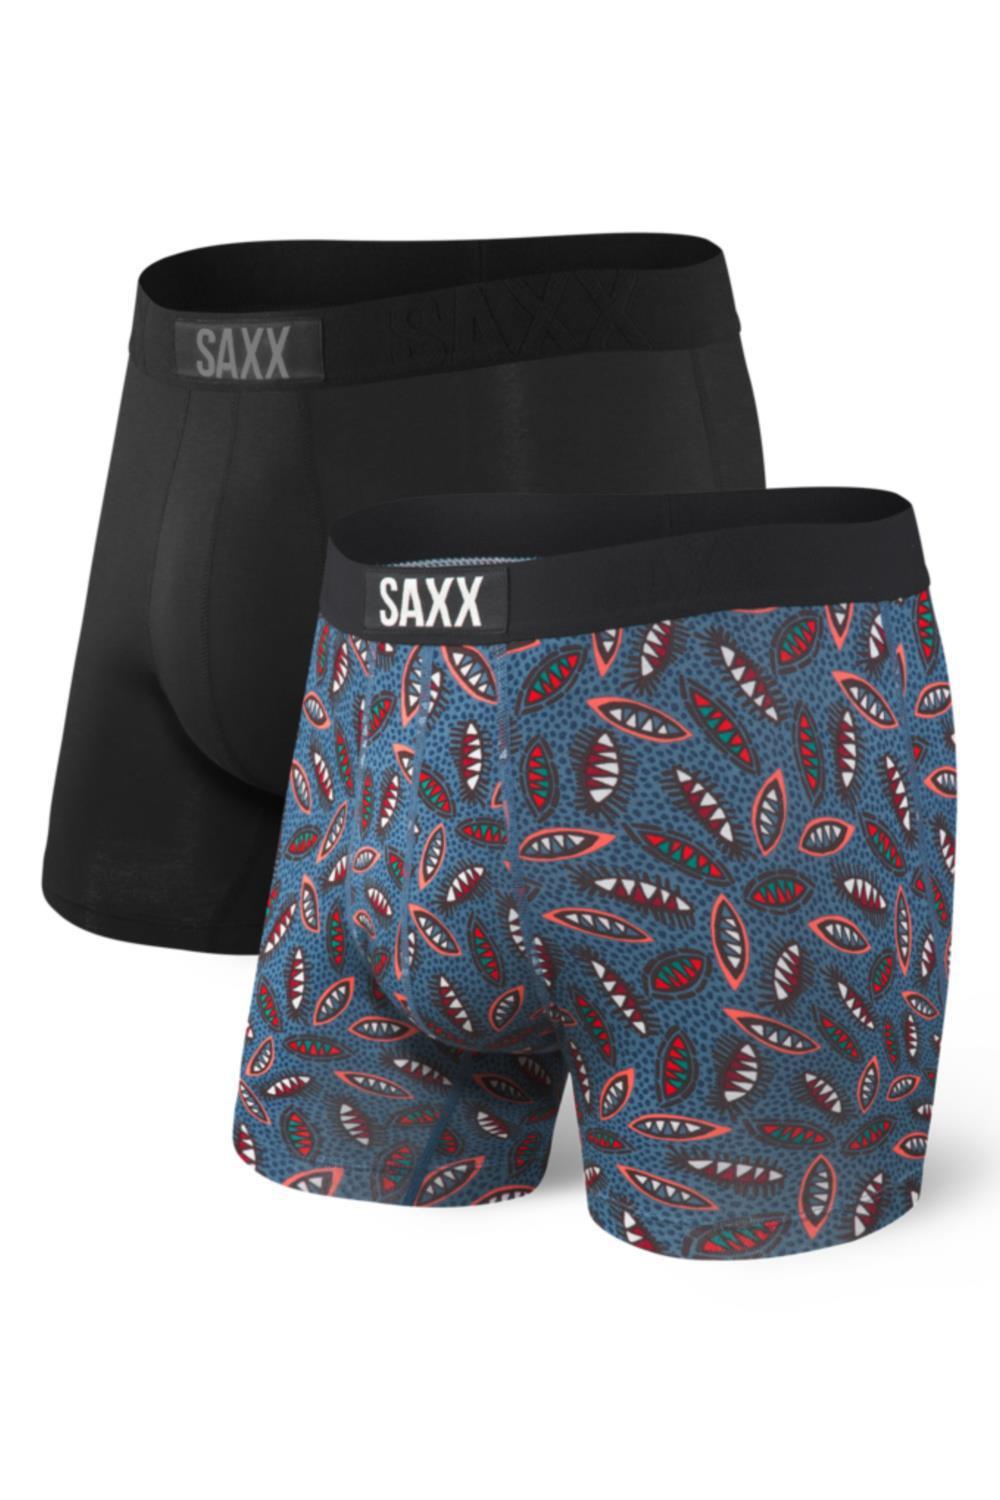  Vibe Boxer Brief 2pk (Solid + Pattern) Solid Black/Pattern